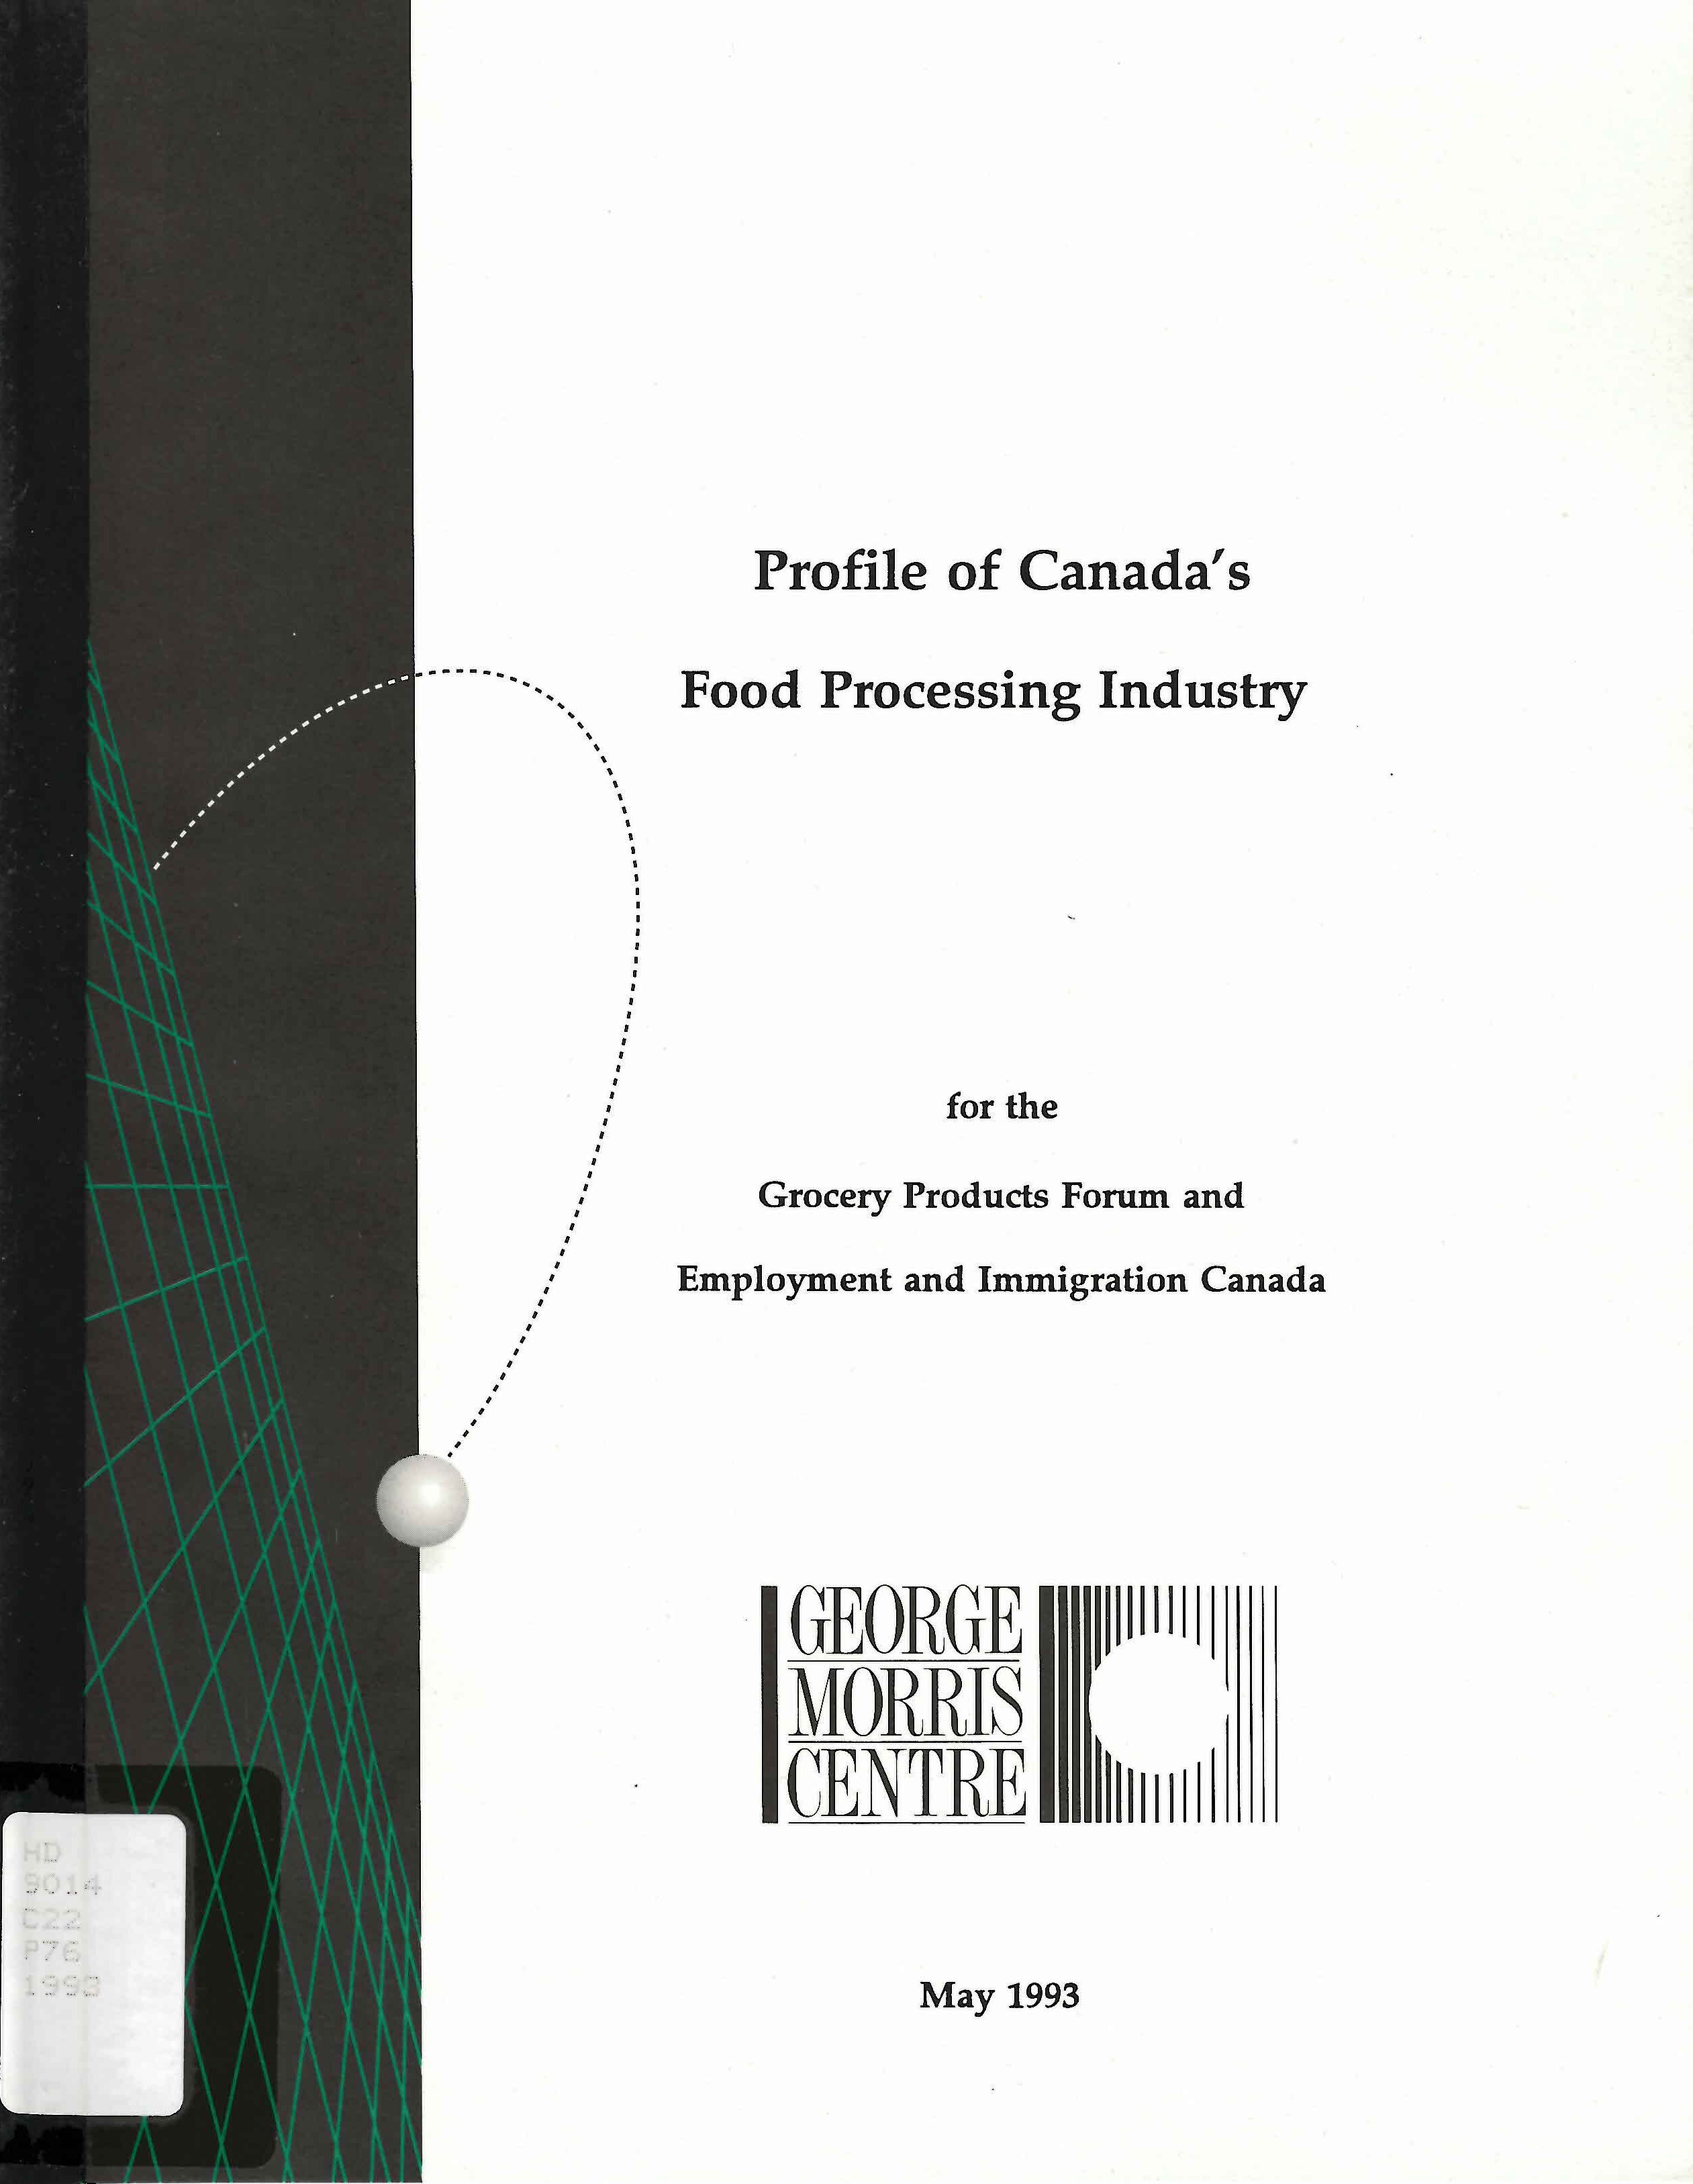 Profile of Canada's food processing industry